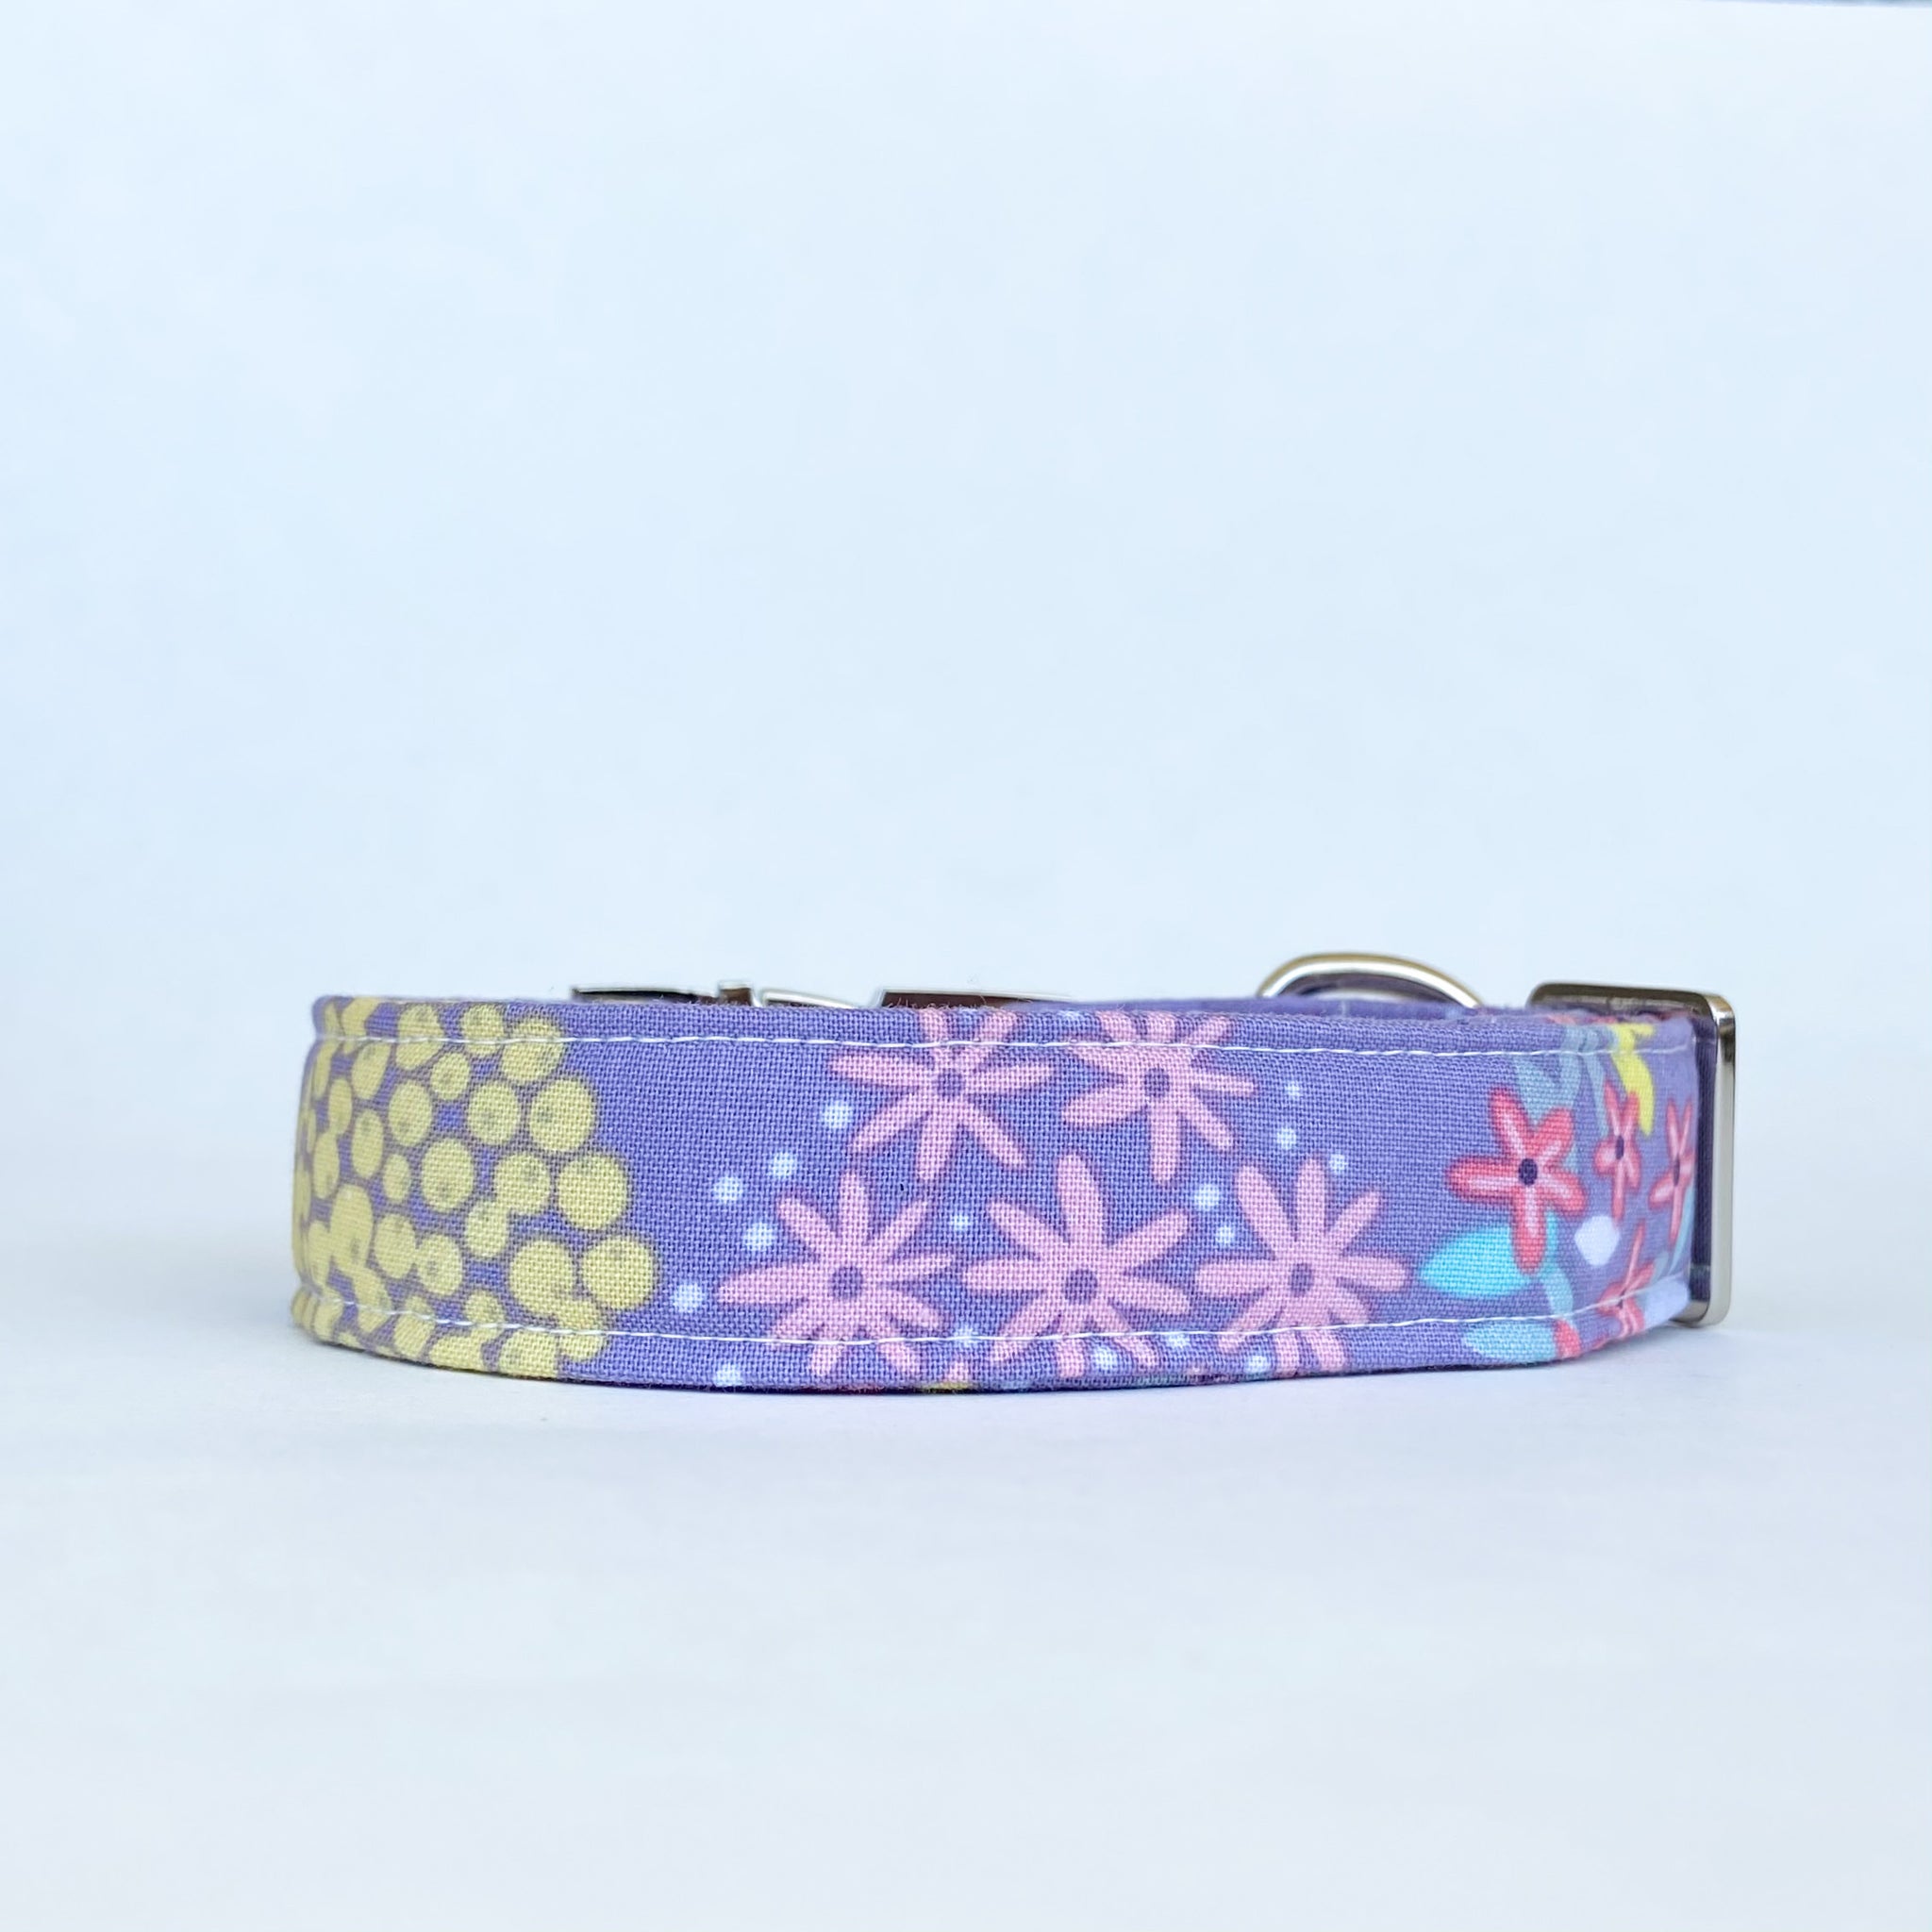 Wildflowers dog collar with silver buckle